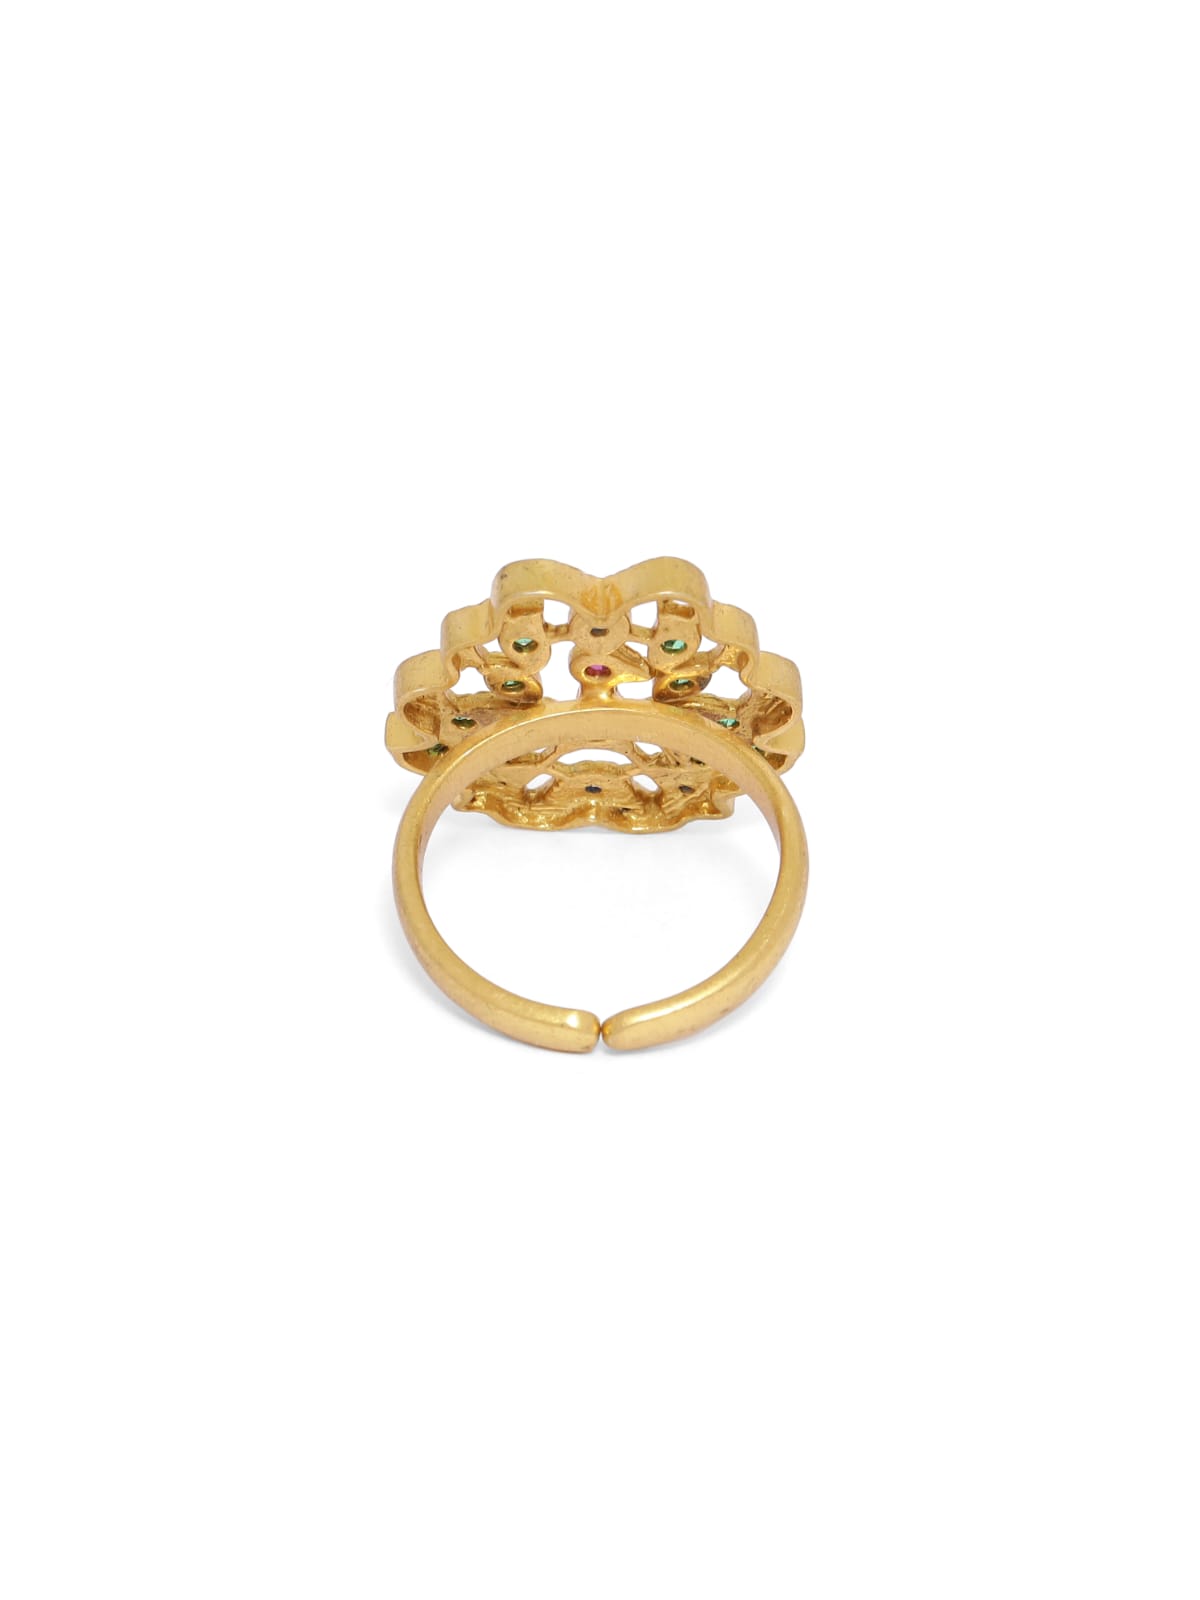 Mayur ring with glass stones in sterling Silver, micron Gold plated, adjustable.